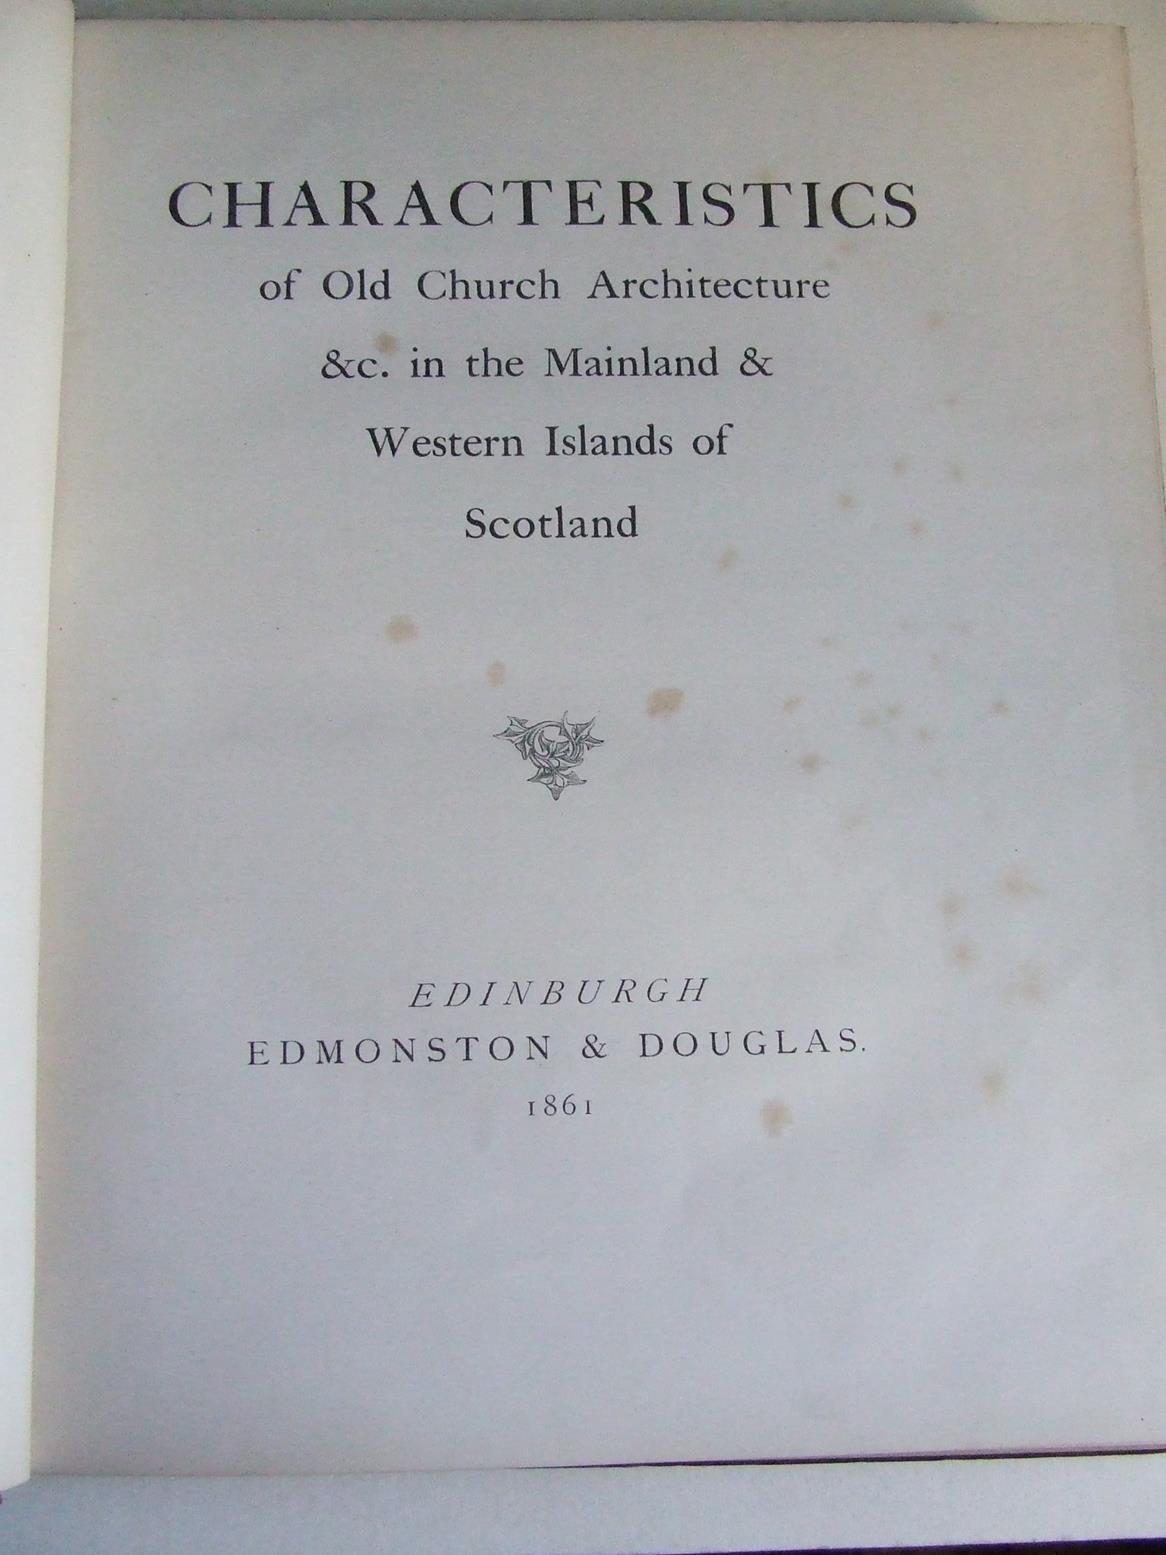 Characteristics of Old Church Architecture etc. in the Mainland & Western Islands of Scotland